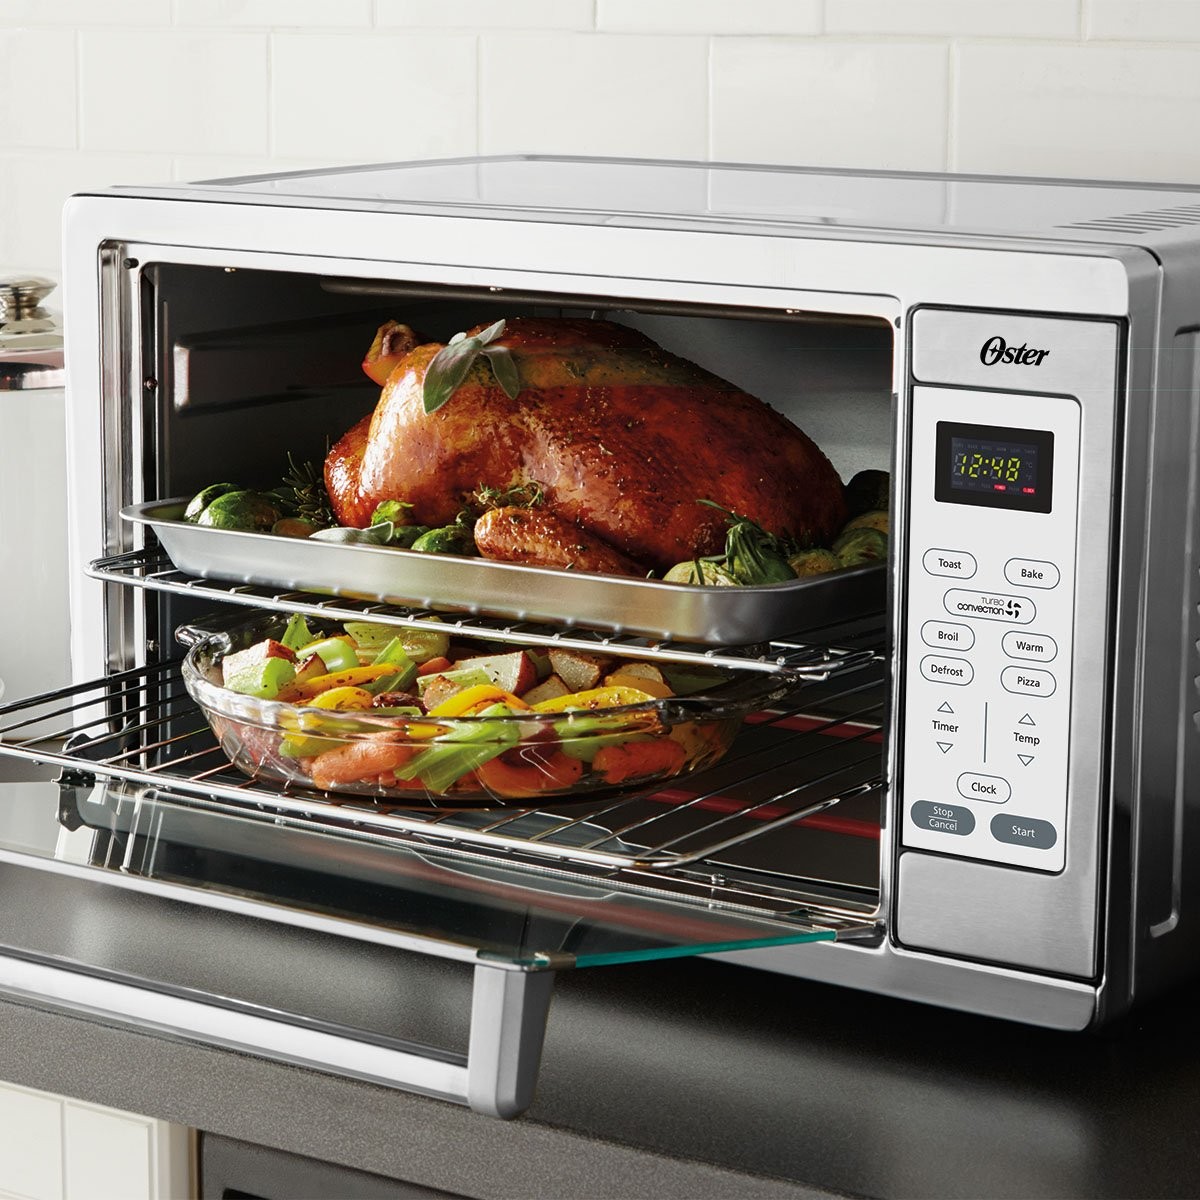 Countertop Convection Oven Large 1 Precautions You Must Take Before